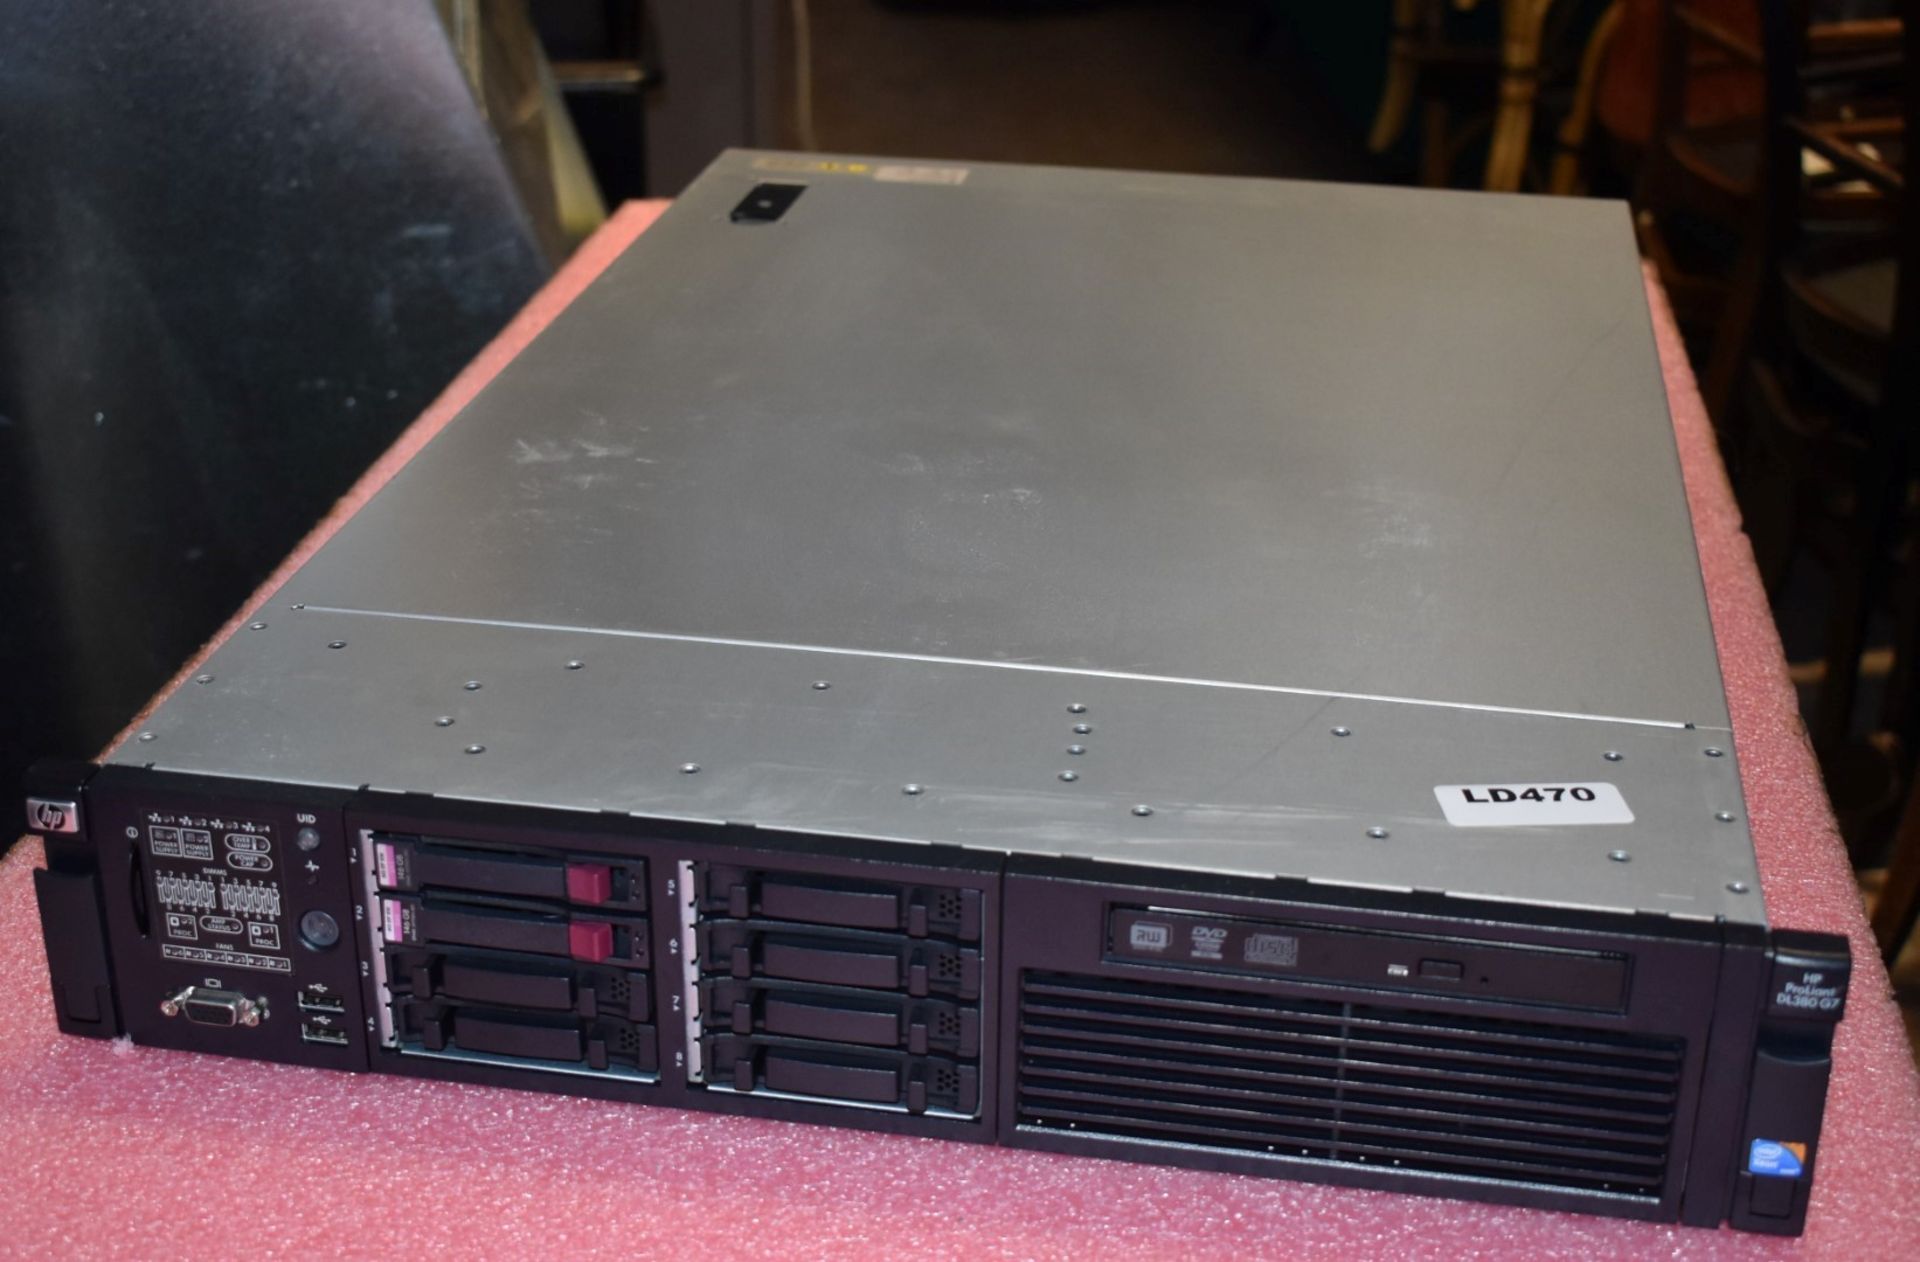 1 x HP ProLiant DL380 G7 Server With 2 x Intel Xeon X5650 Six Core 3.06ghz Processors and 84gb Ram - - Image 5 of 7